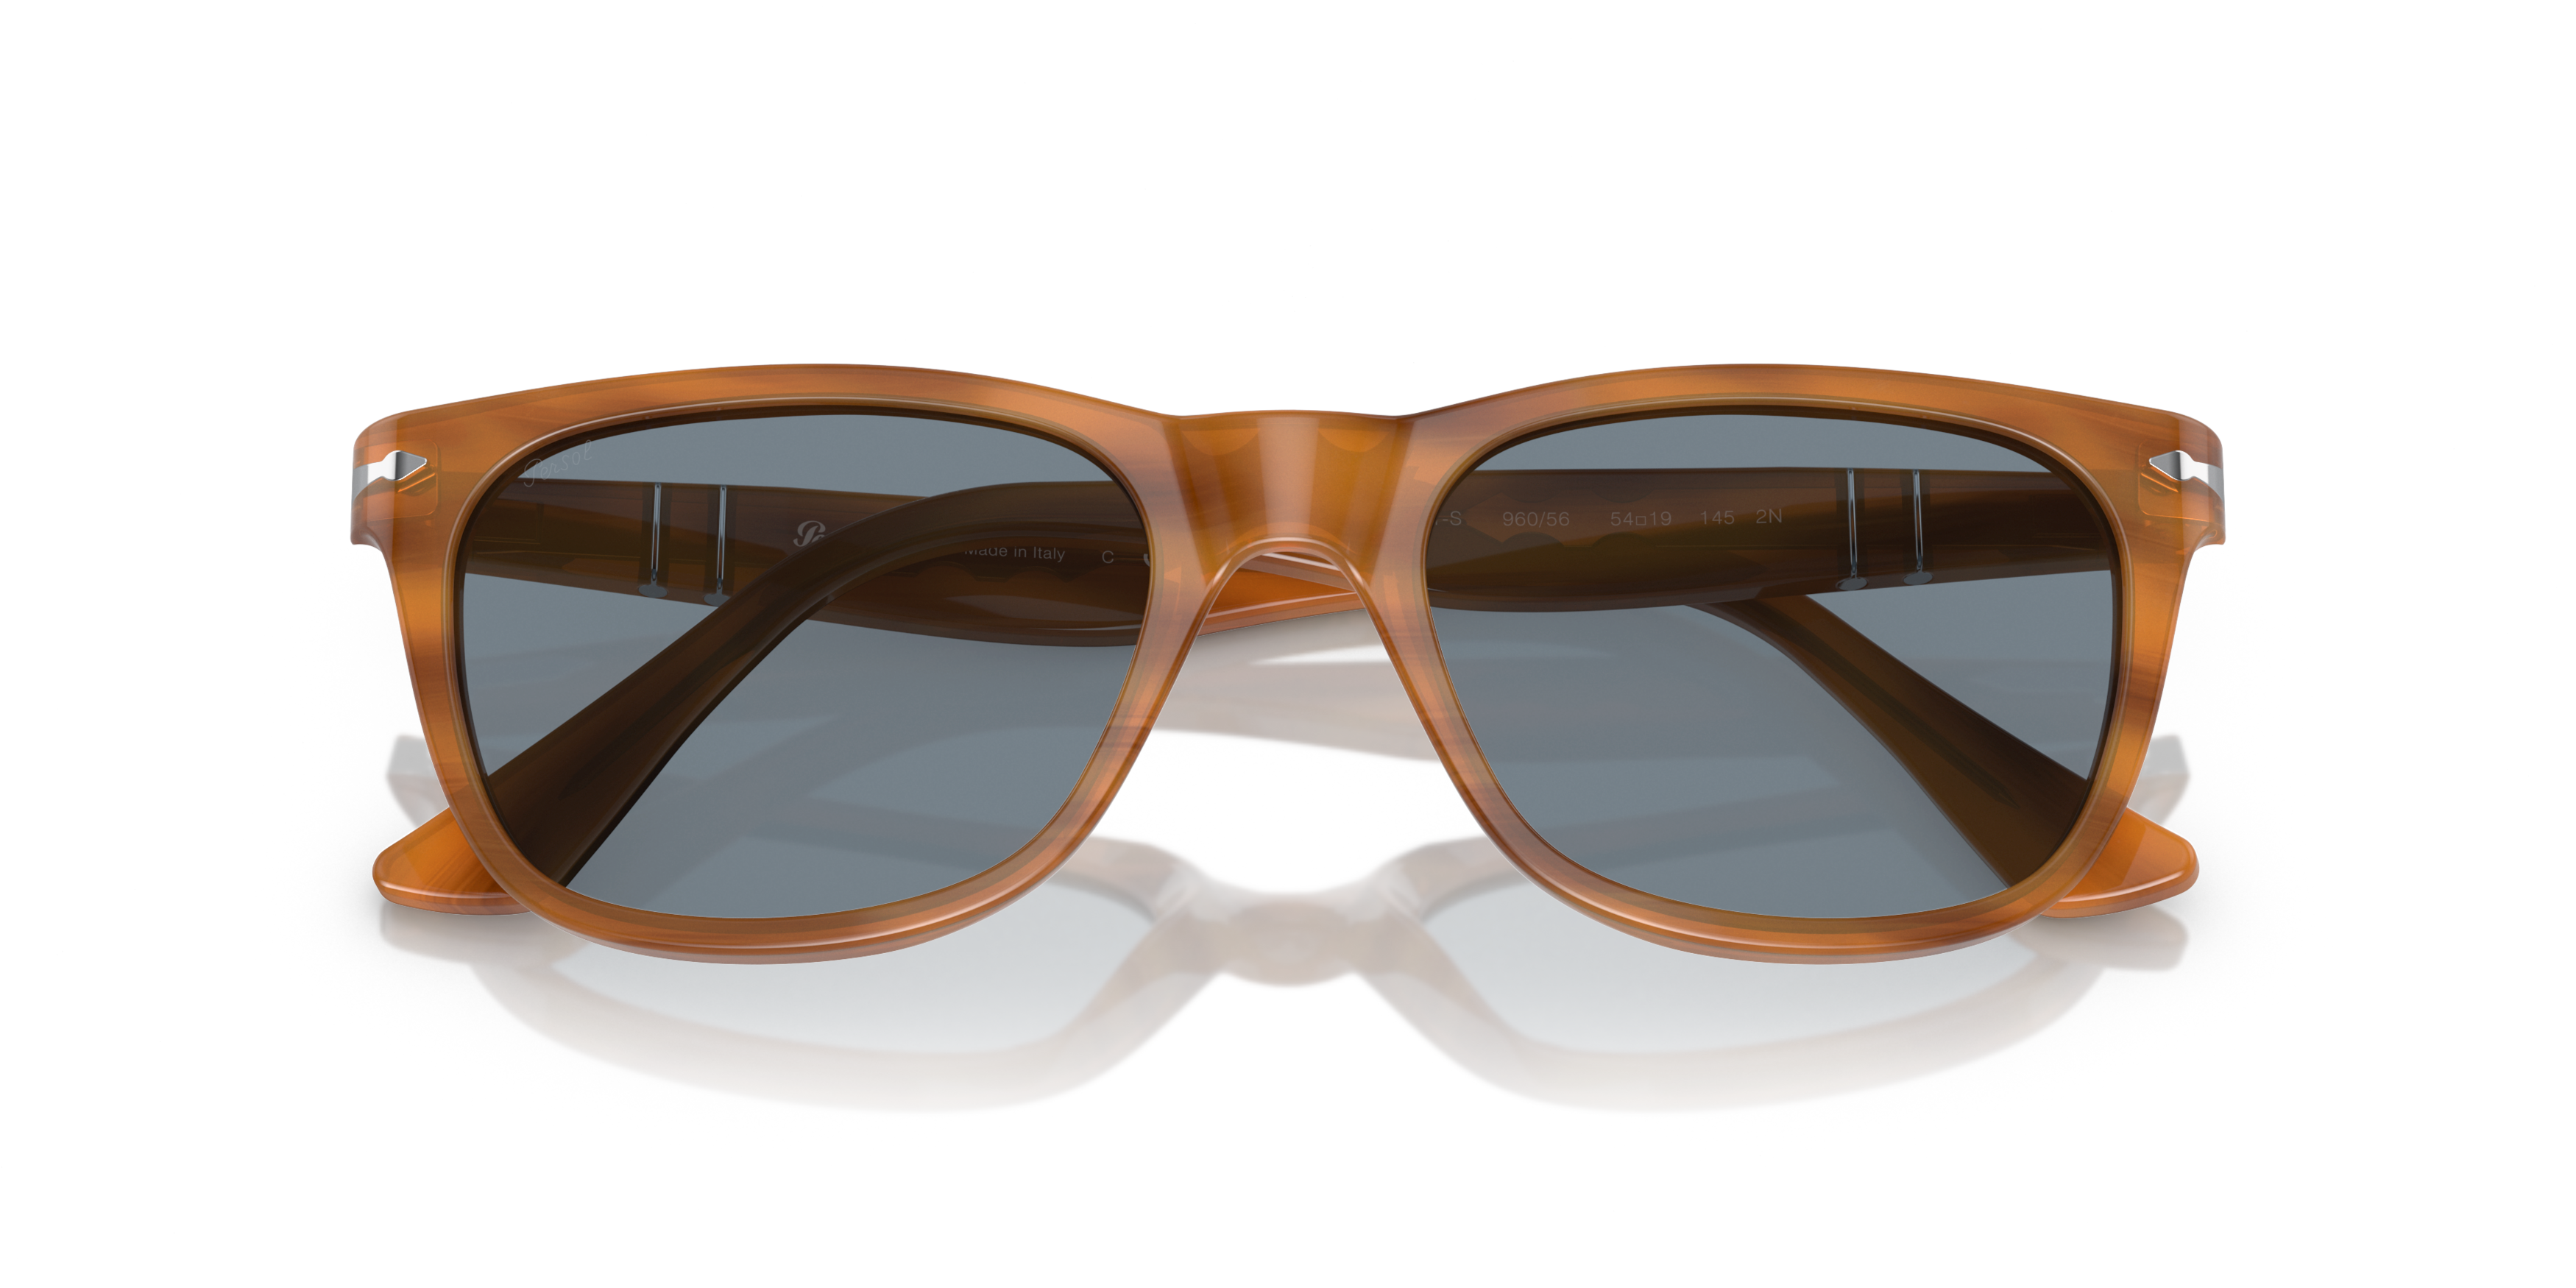 [products.image.folded] Persol 0PO3291S 960/56 Solbriller